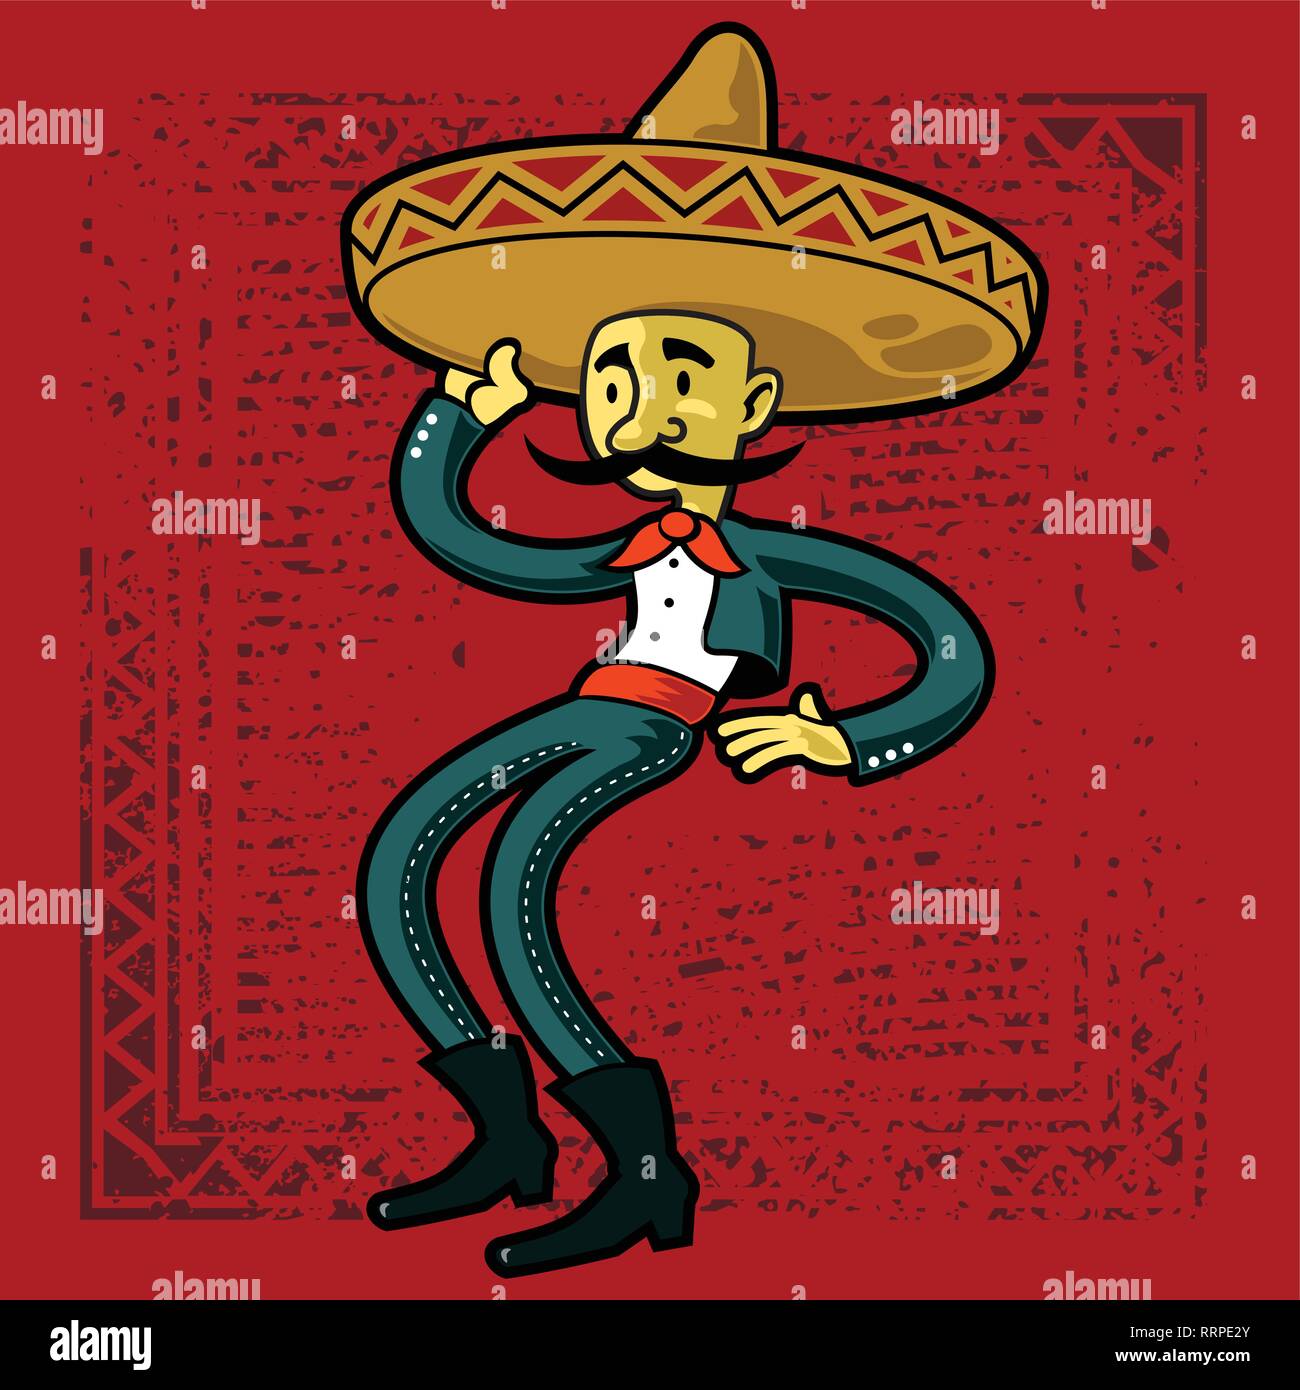 Mexican Food Background Stock Vector